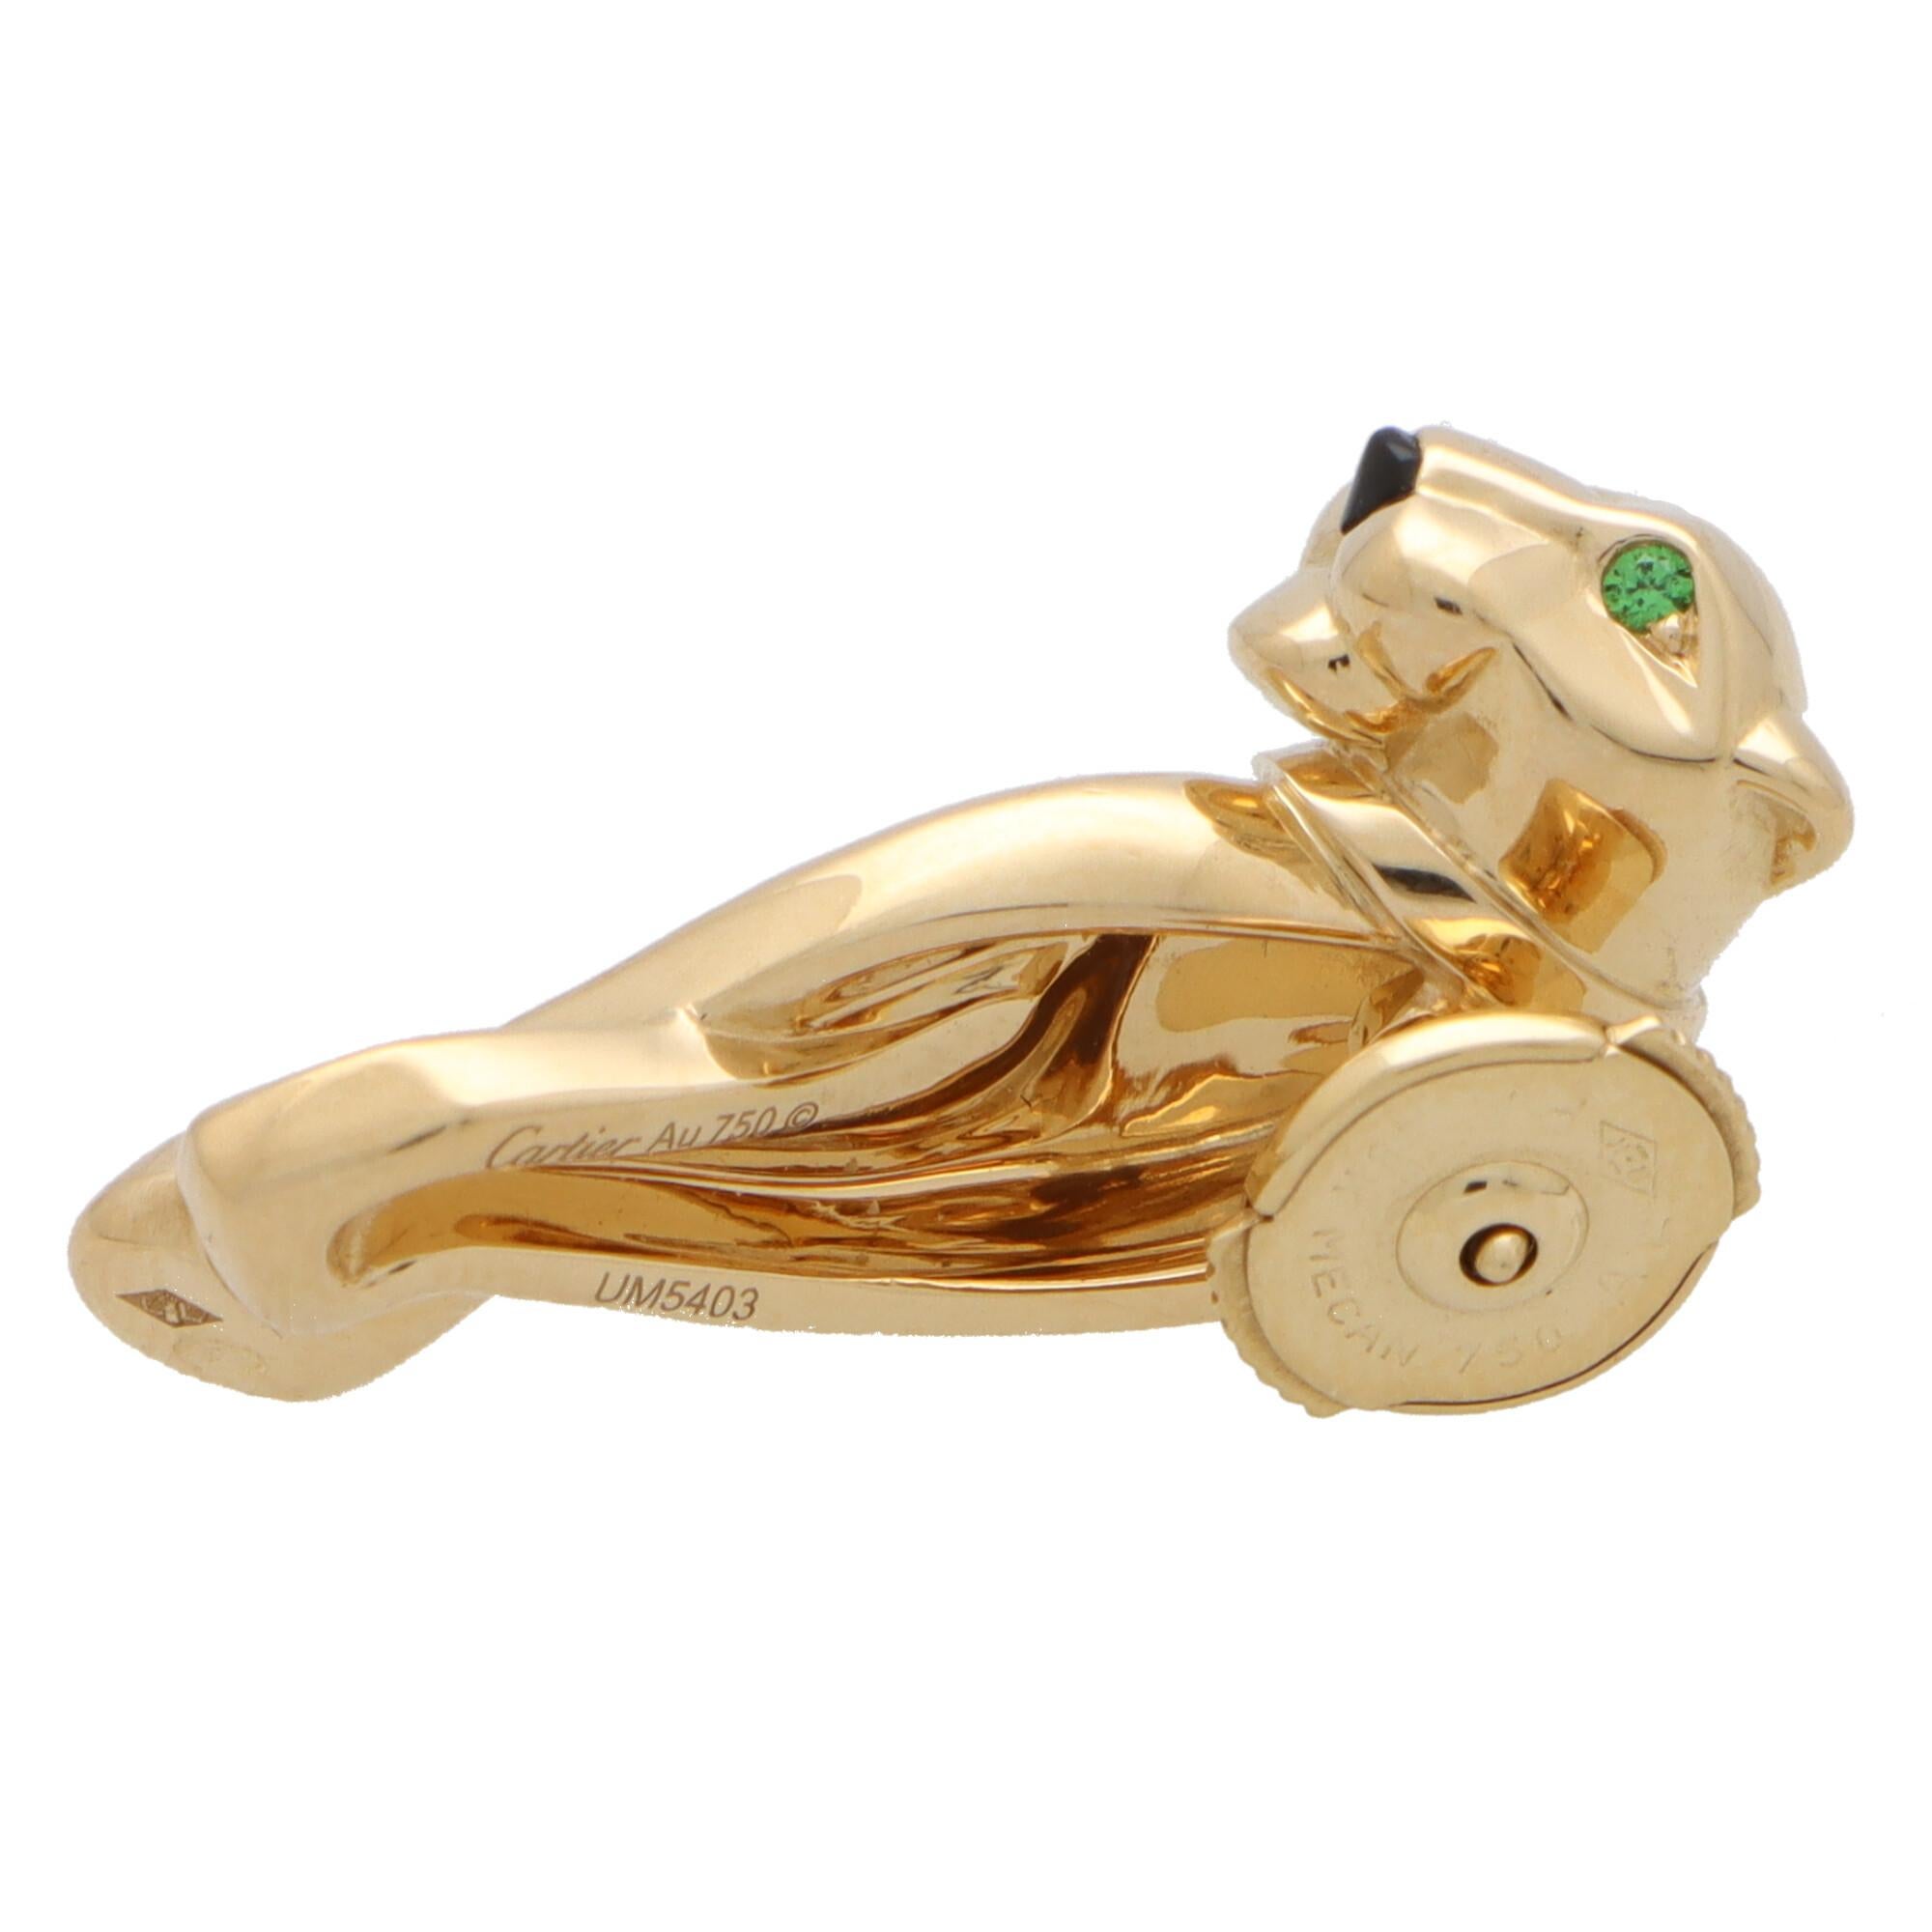 A vintage Cartier panther pin brooch set in 18k yellow gold.

This beautiful piece depicts Cartier’s iconic panther motif and is made of solid 18k yellow gold. The panther face is set with two round cut tsavorite garnet eyes and a onyx nose and is